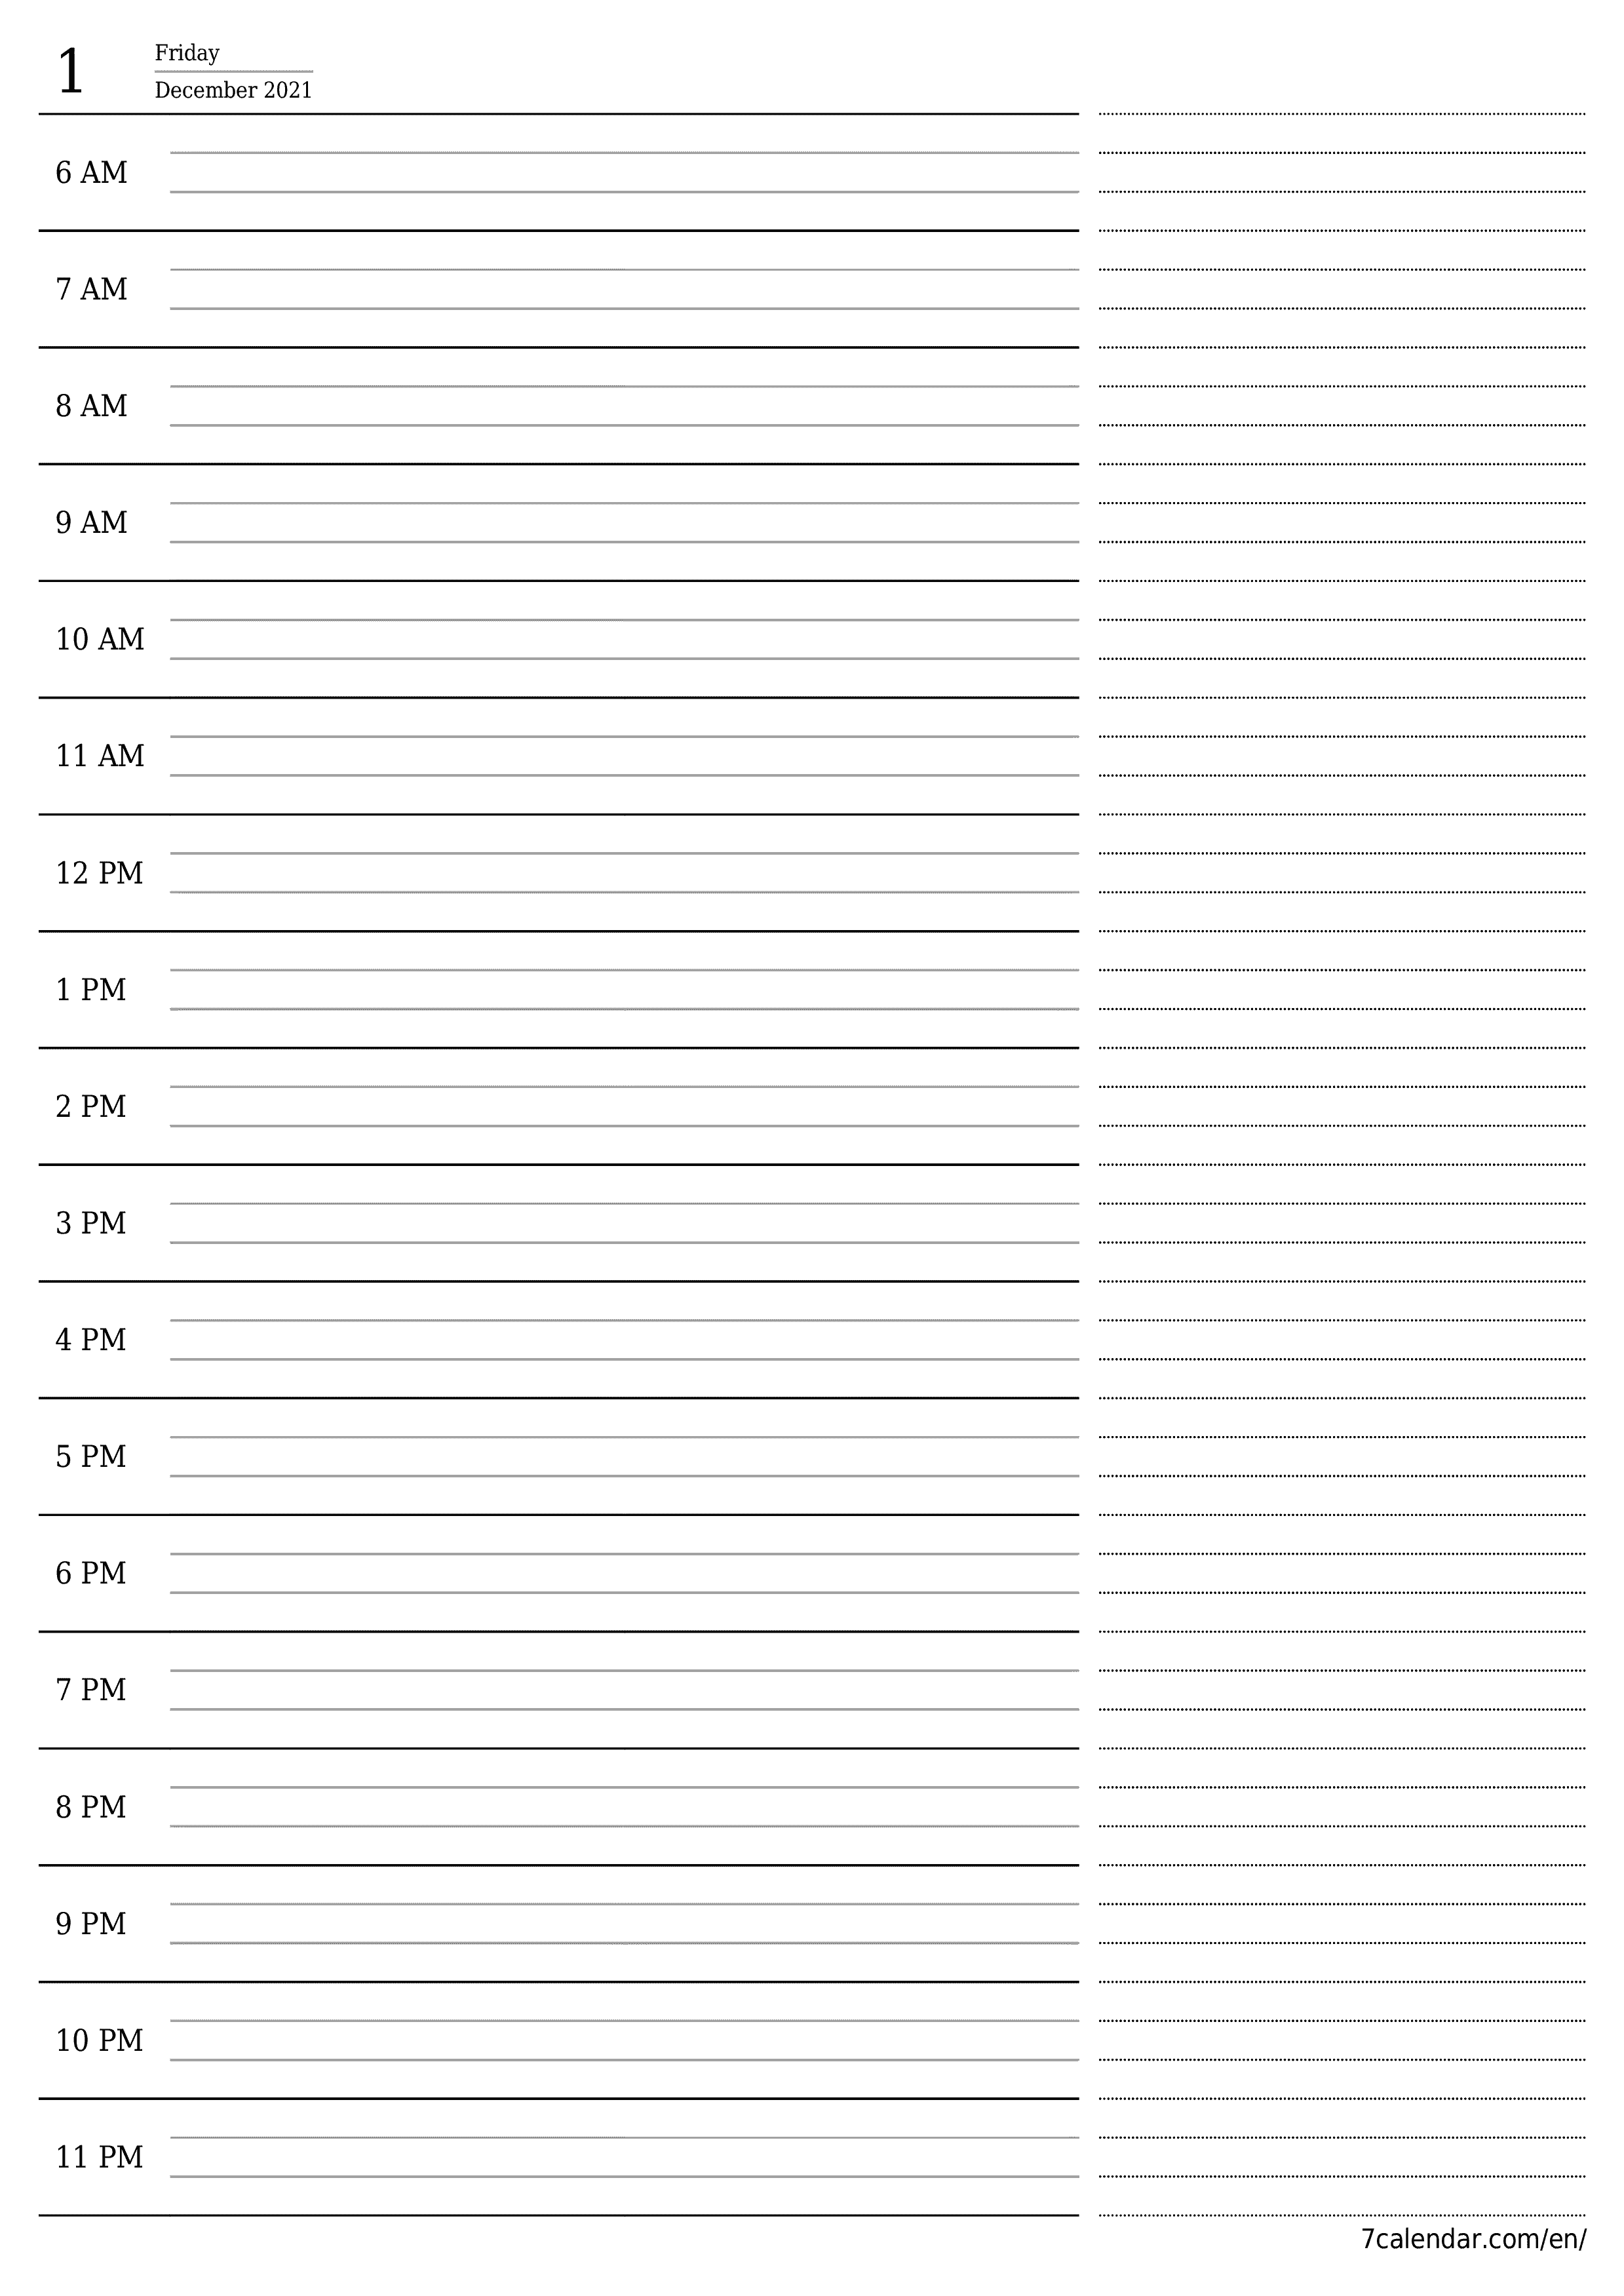 Blank daily calendar planner for day December 2021 with notes, save and print to PDF PNG English - 7calendar.com